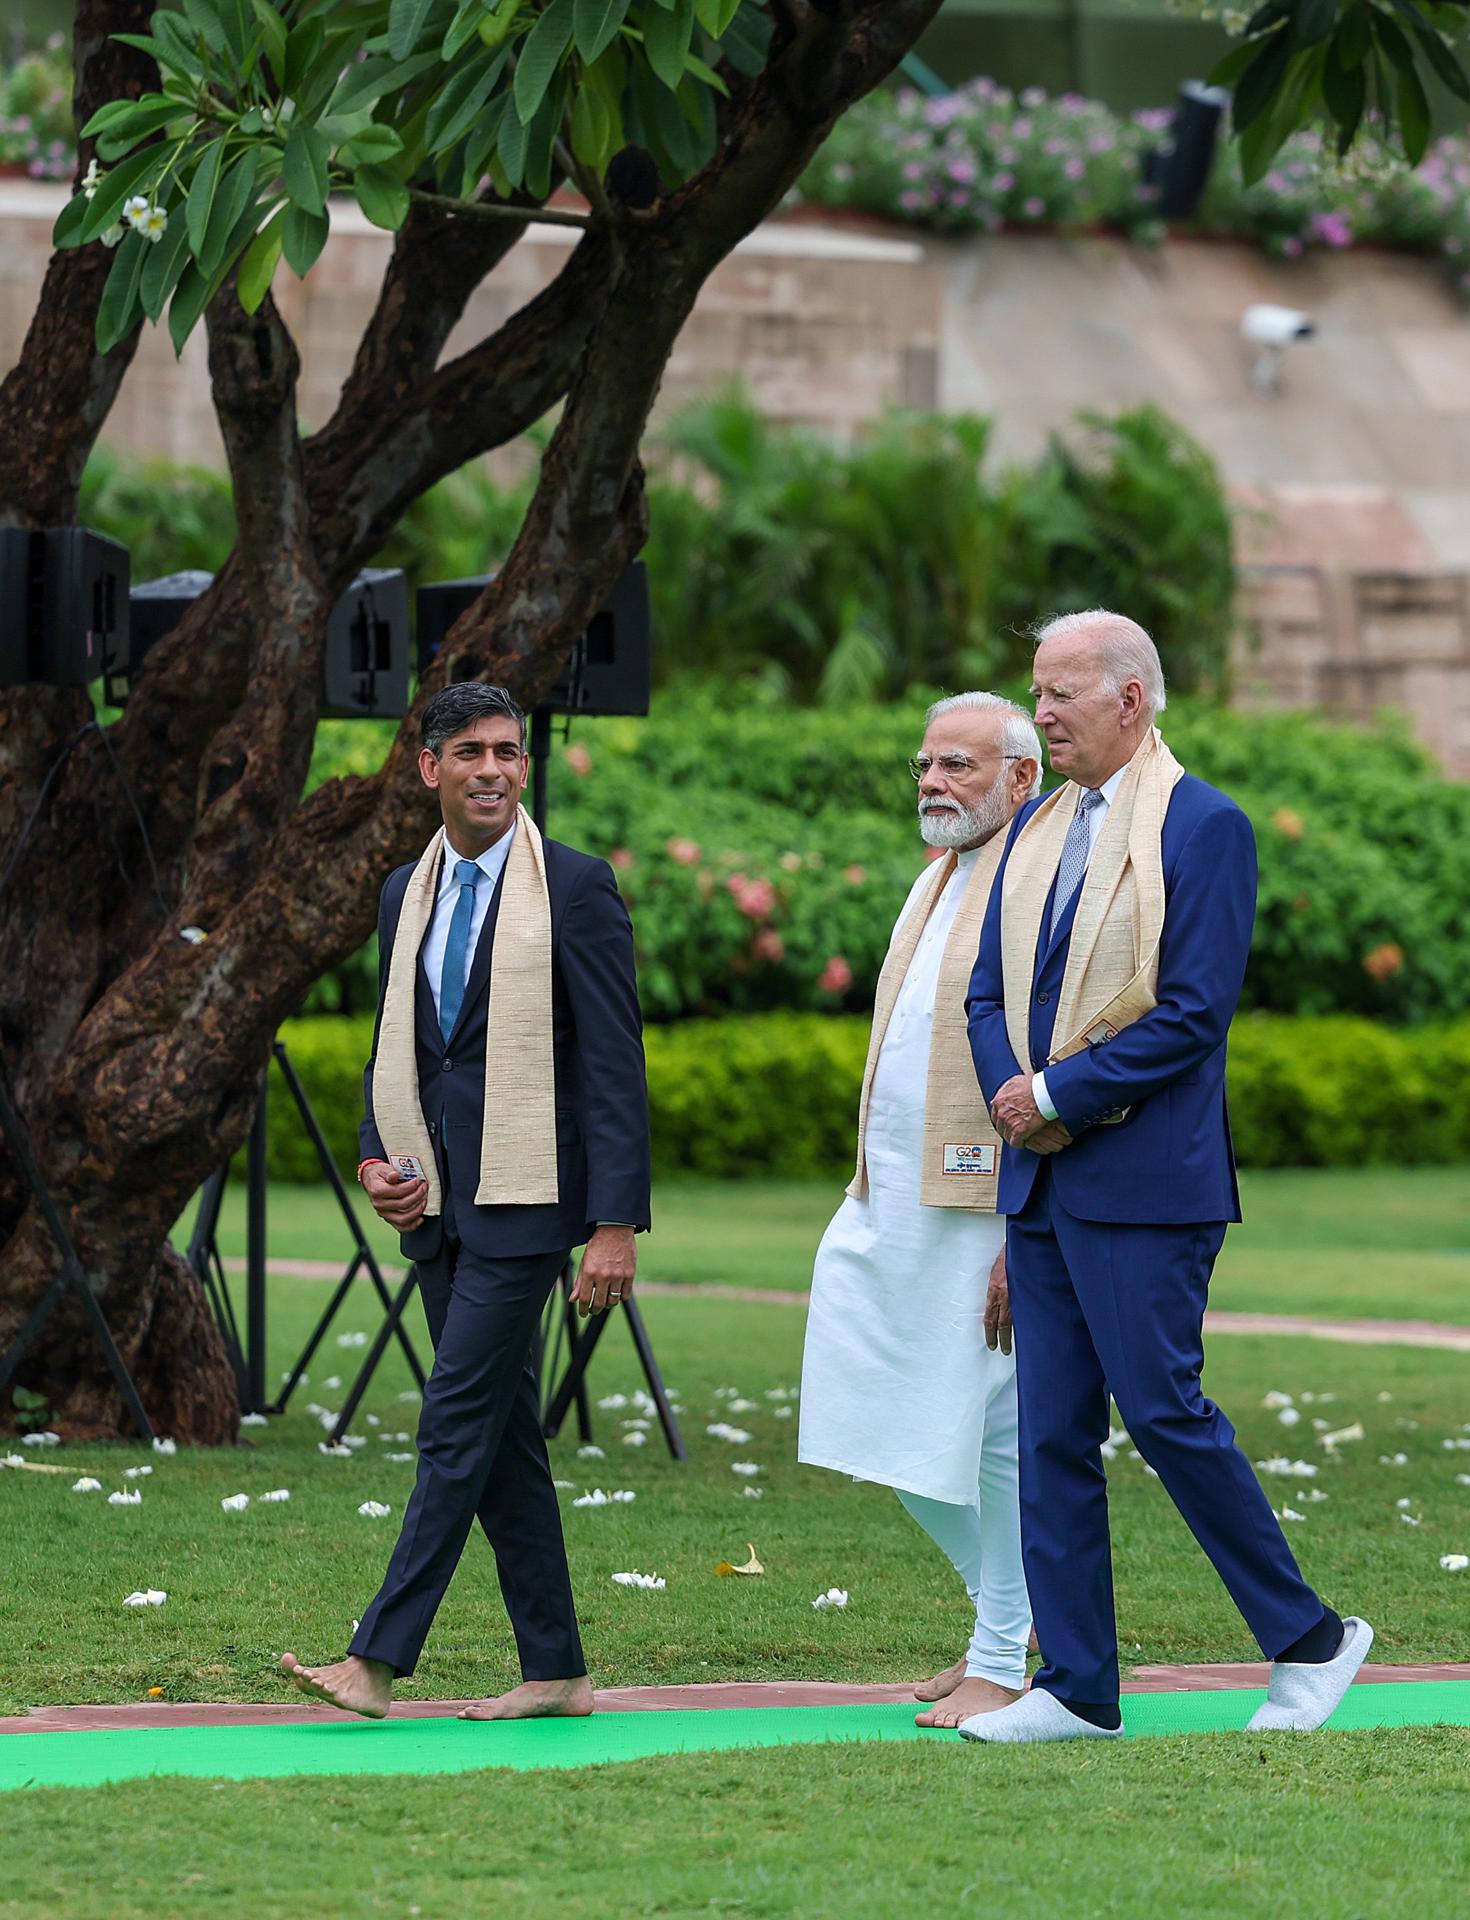 A handout photo made available by the Indian Press Information Bureau (PIB) shows Indian Prime Minister Narendra Modi (R) welcoming US President Jo Biden (R) and British Prime Minister Rishi Sunak (L) upon his arrival at the Mahatma Gandhi's memorial in Rajghat, New Delhi, India 10 September 2023. EFE/EPA/INDIA PRESS INFORMATION BUREAU HANDOUT EDITORIAL USE ONLY/NO SALES
